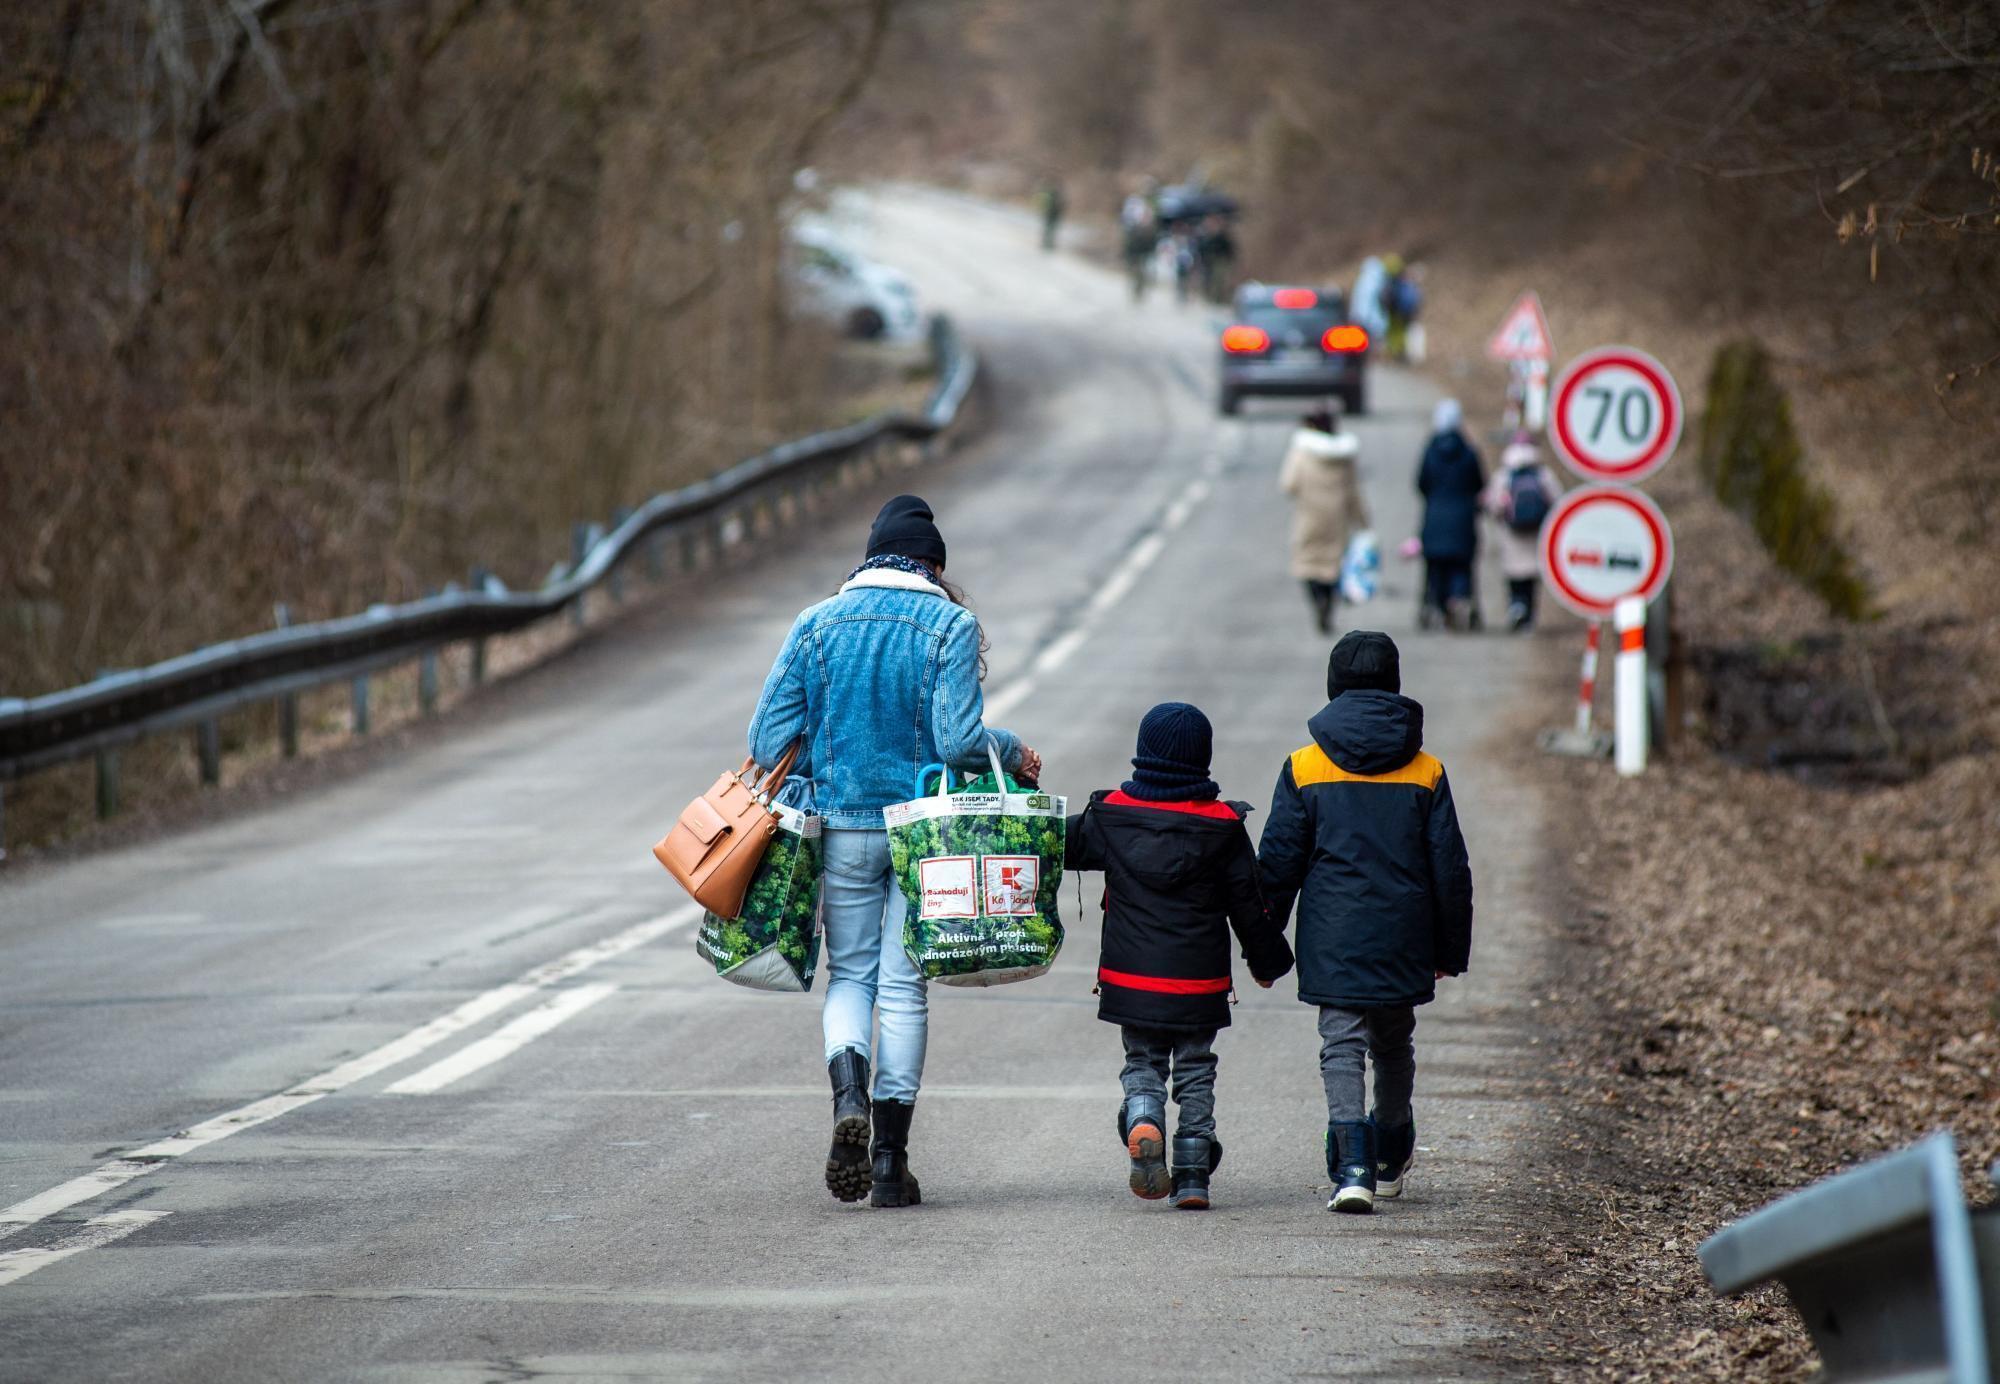 A woman and two children walk down a road.